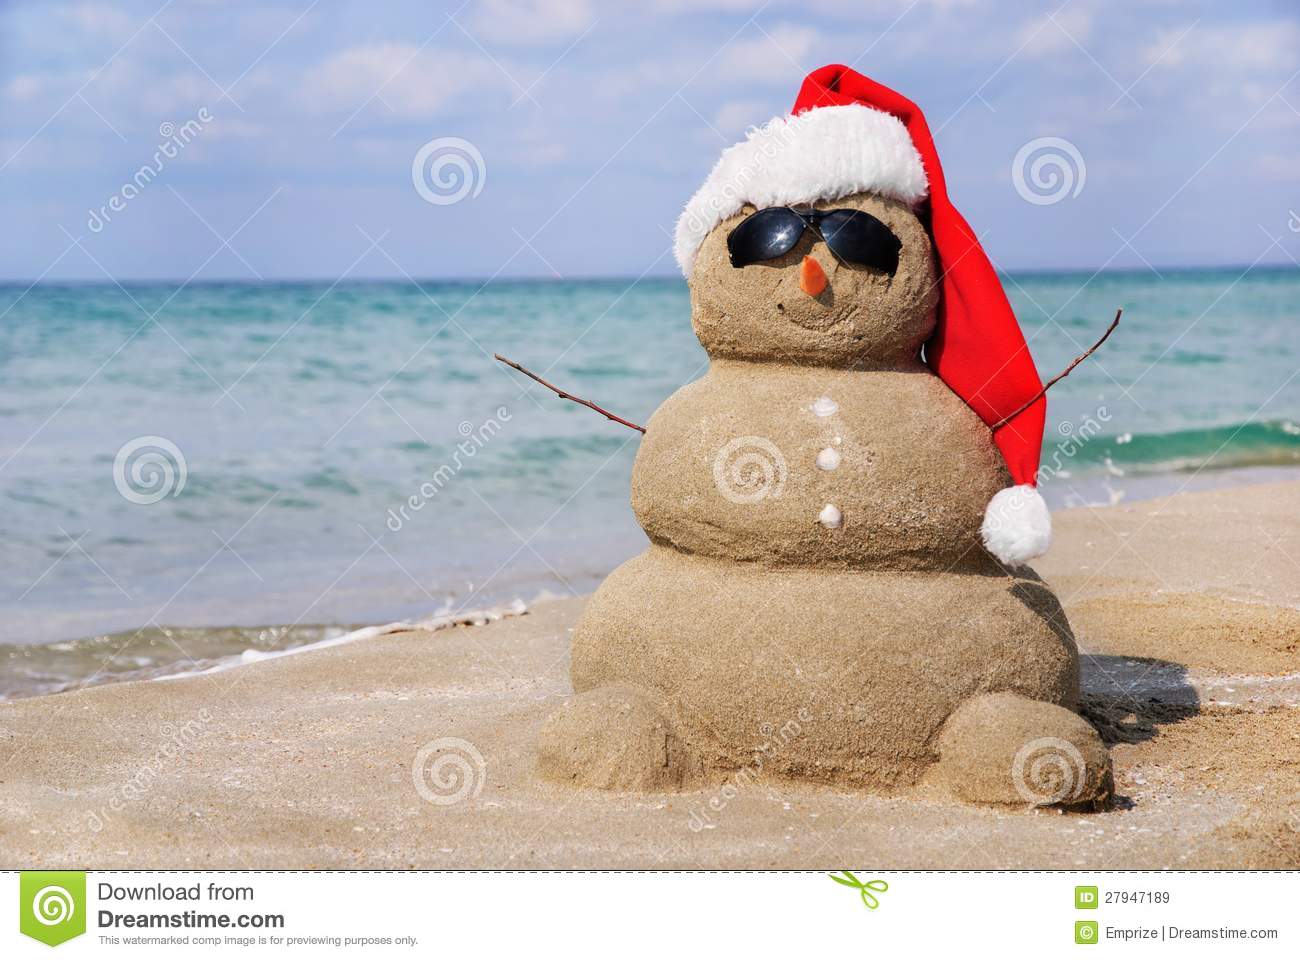 Snowman Made Out Of Sand Holiday Concept Can Be Used For New Year And